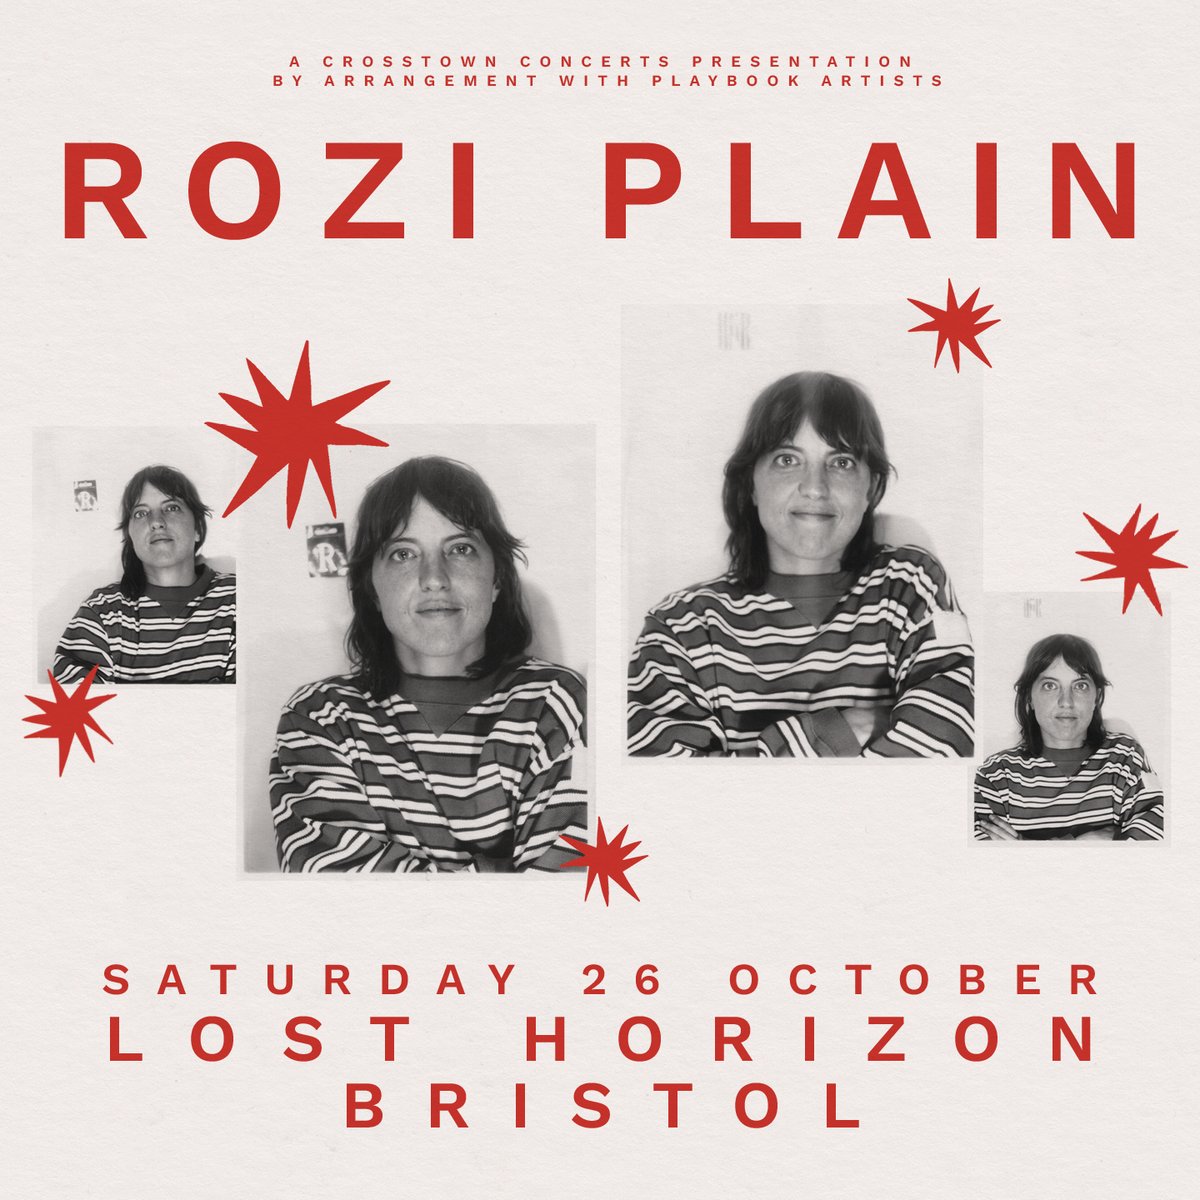 .@ROZIPLAIN plays @LostHorizonHQ Bristol on Saturday 26th October. Tickets are on sale Friday at 10am: crosstownconcerts.seetickets.com/event/rozi-pla…